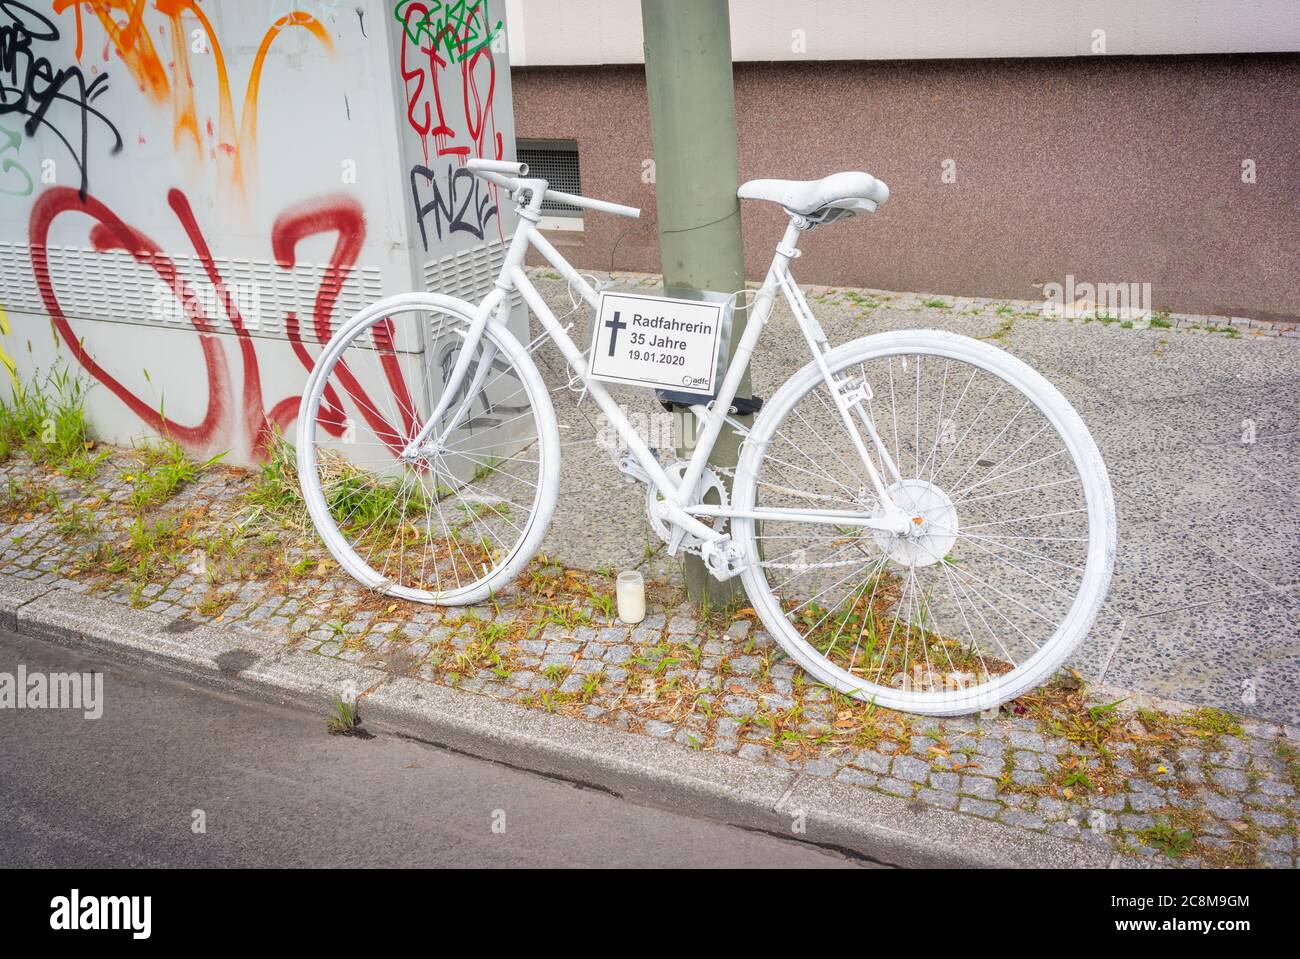 A memorial in the shape of a bicycle to remember a cyslist who died during a traffic accident in Berlin in 2020, Germany, Europe Stock Photo